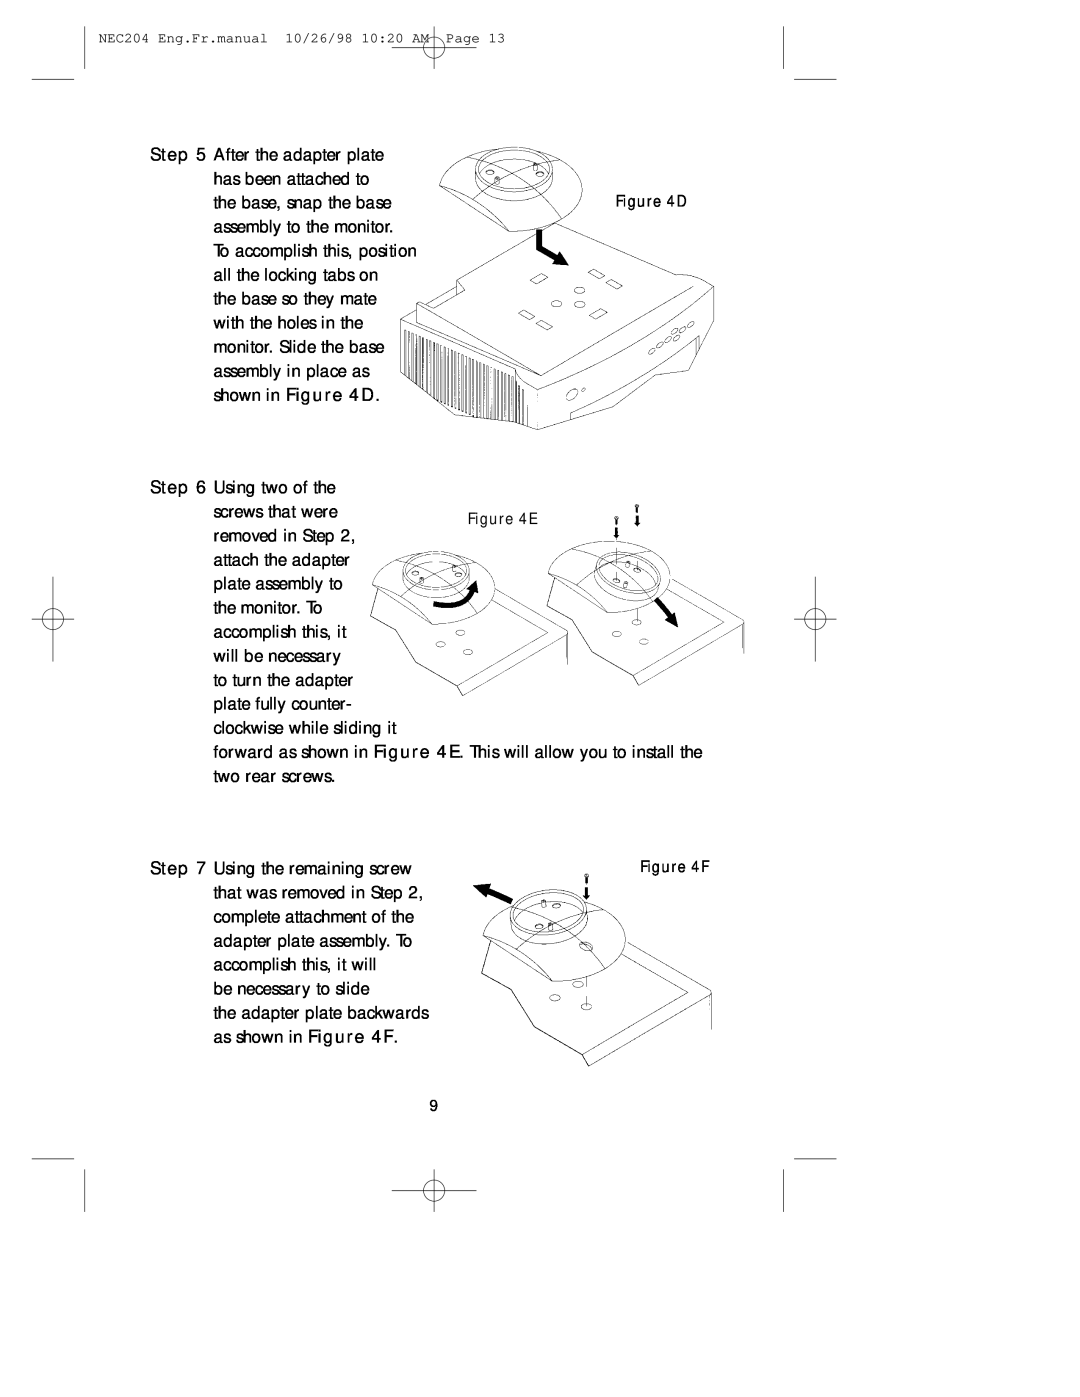 NEC A3844, IB-USB user manual After the adapter plate 